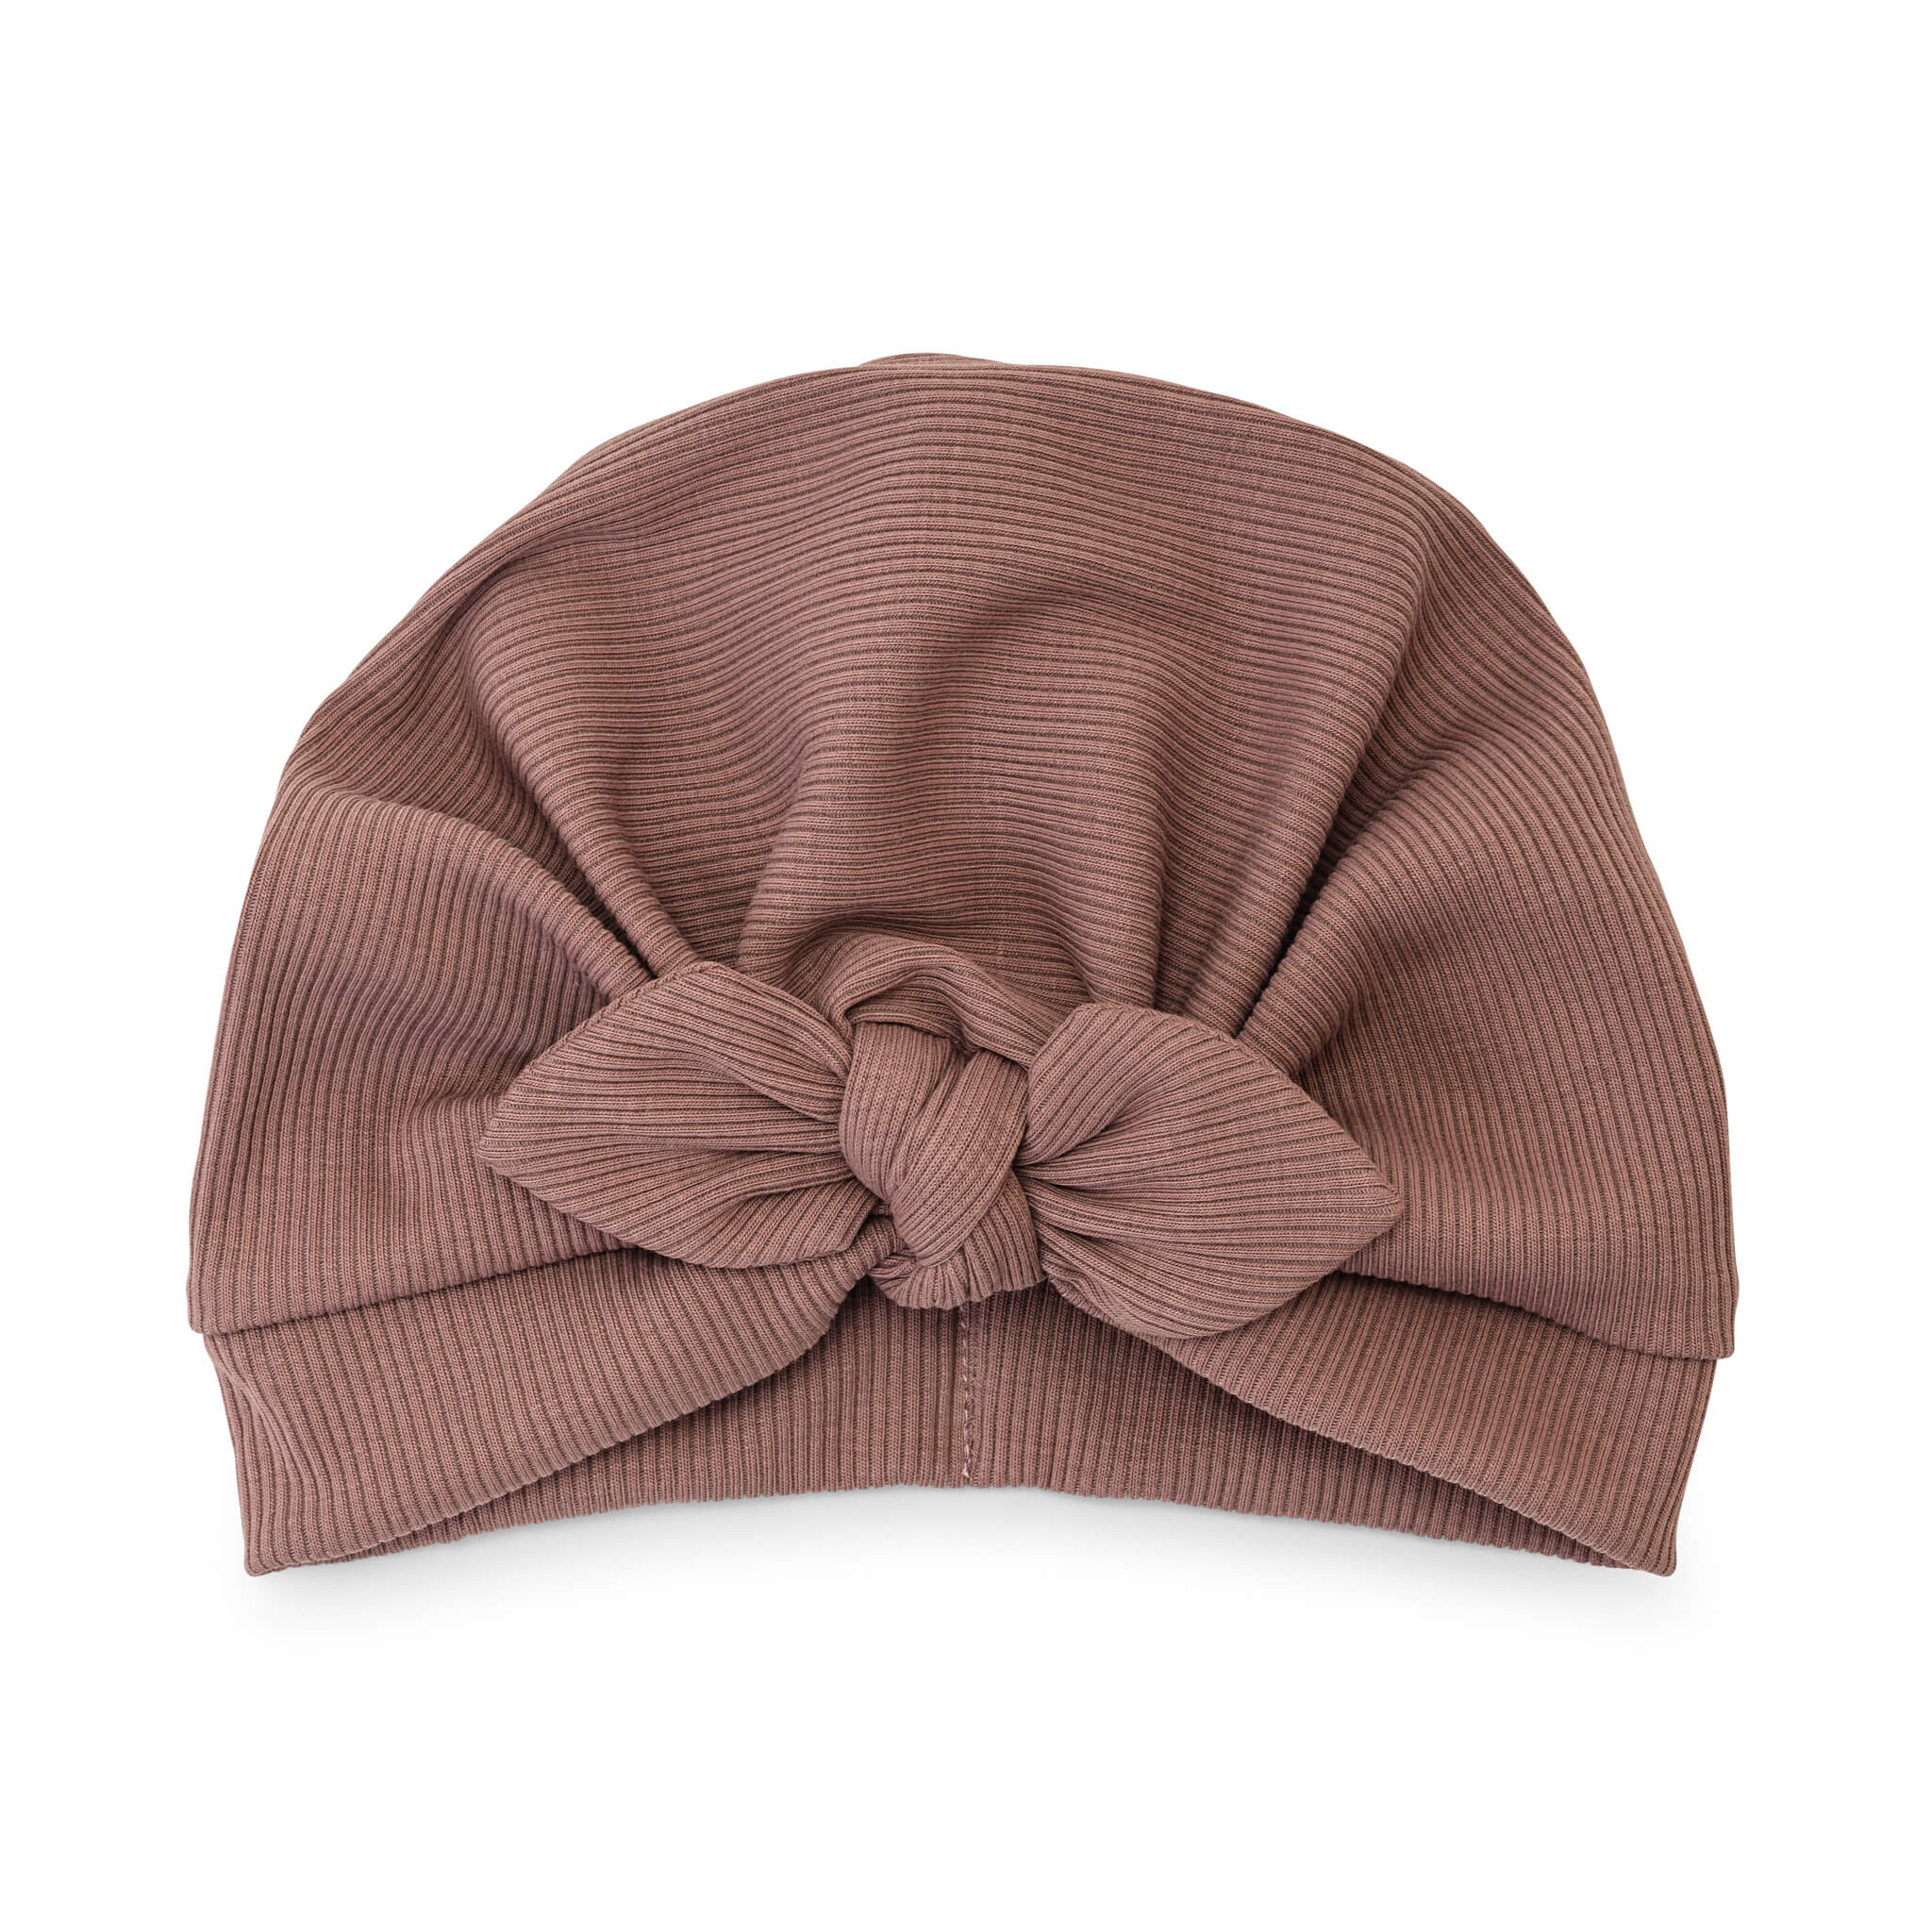 Turban hat with bow - mauve